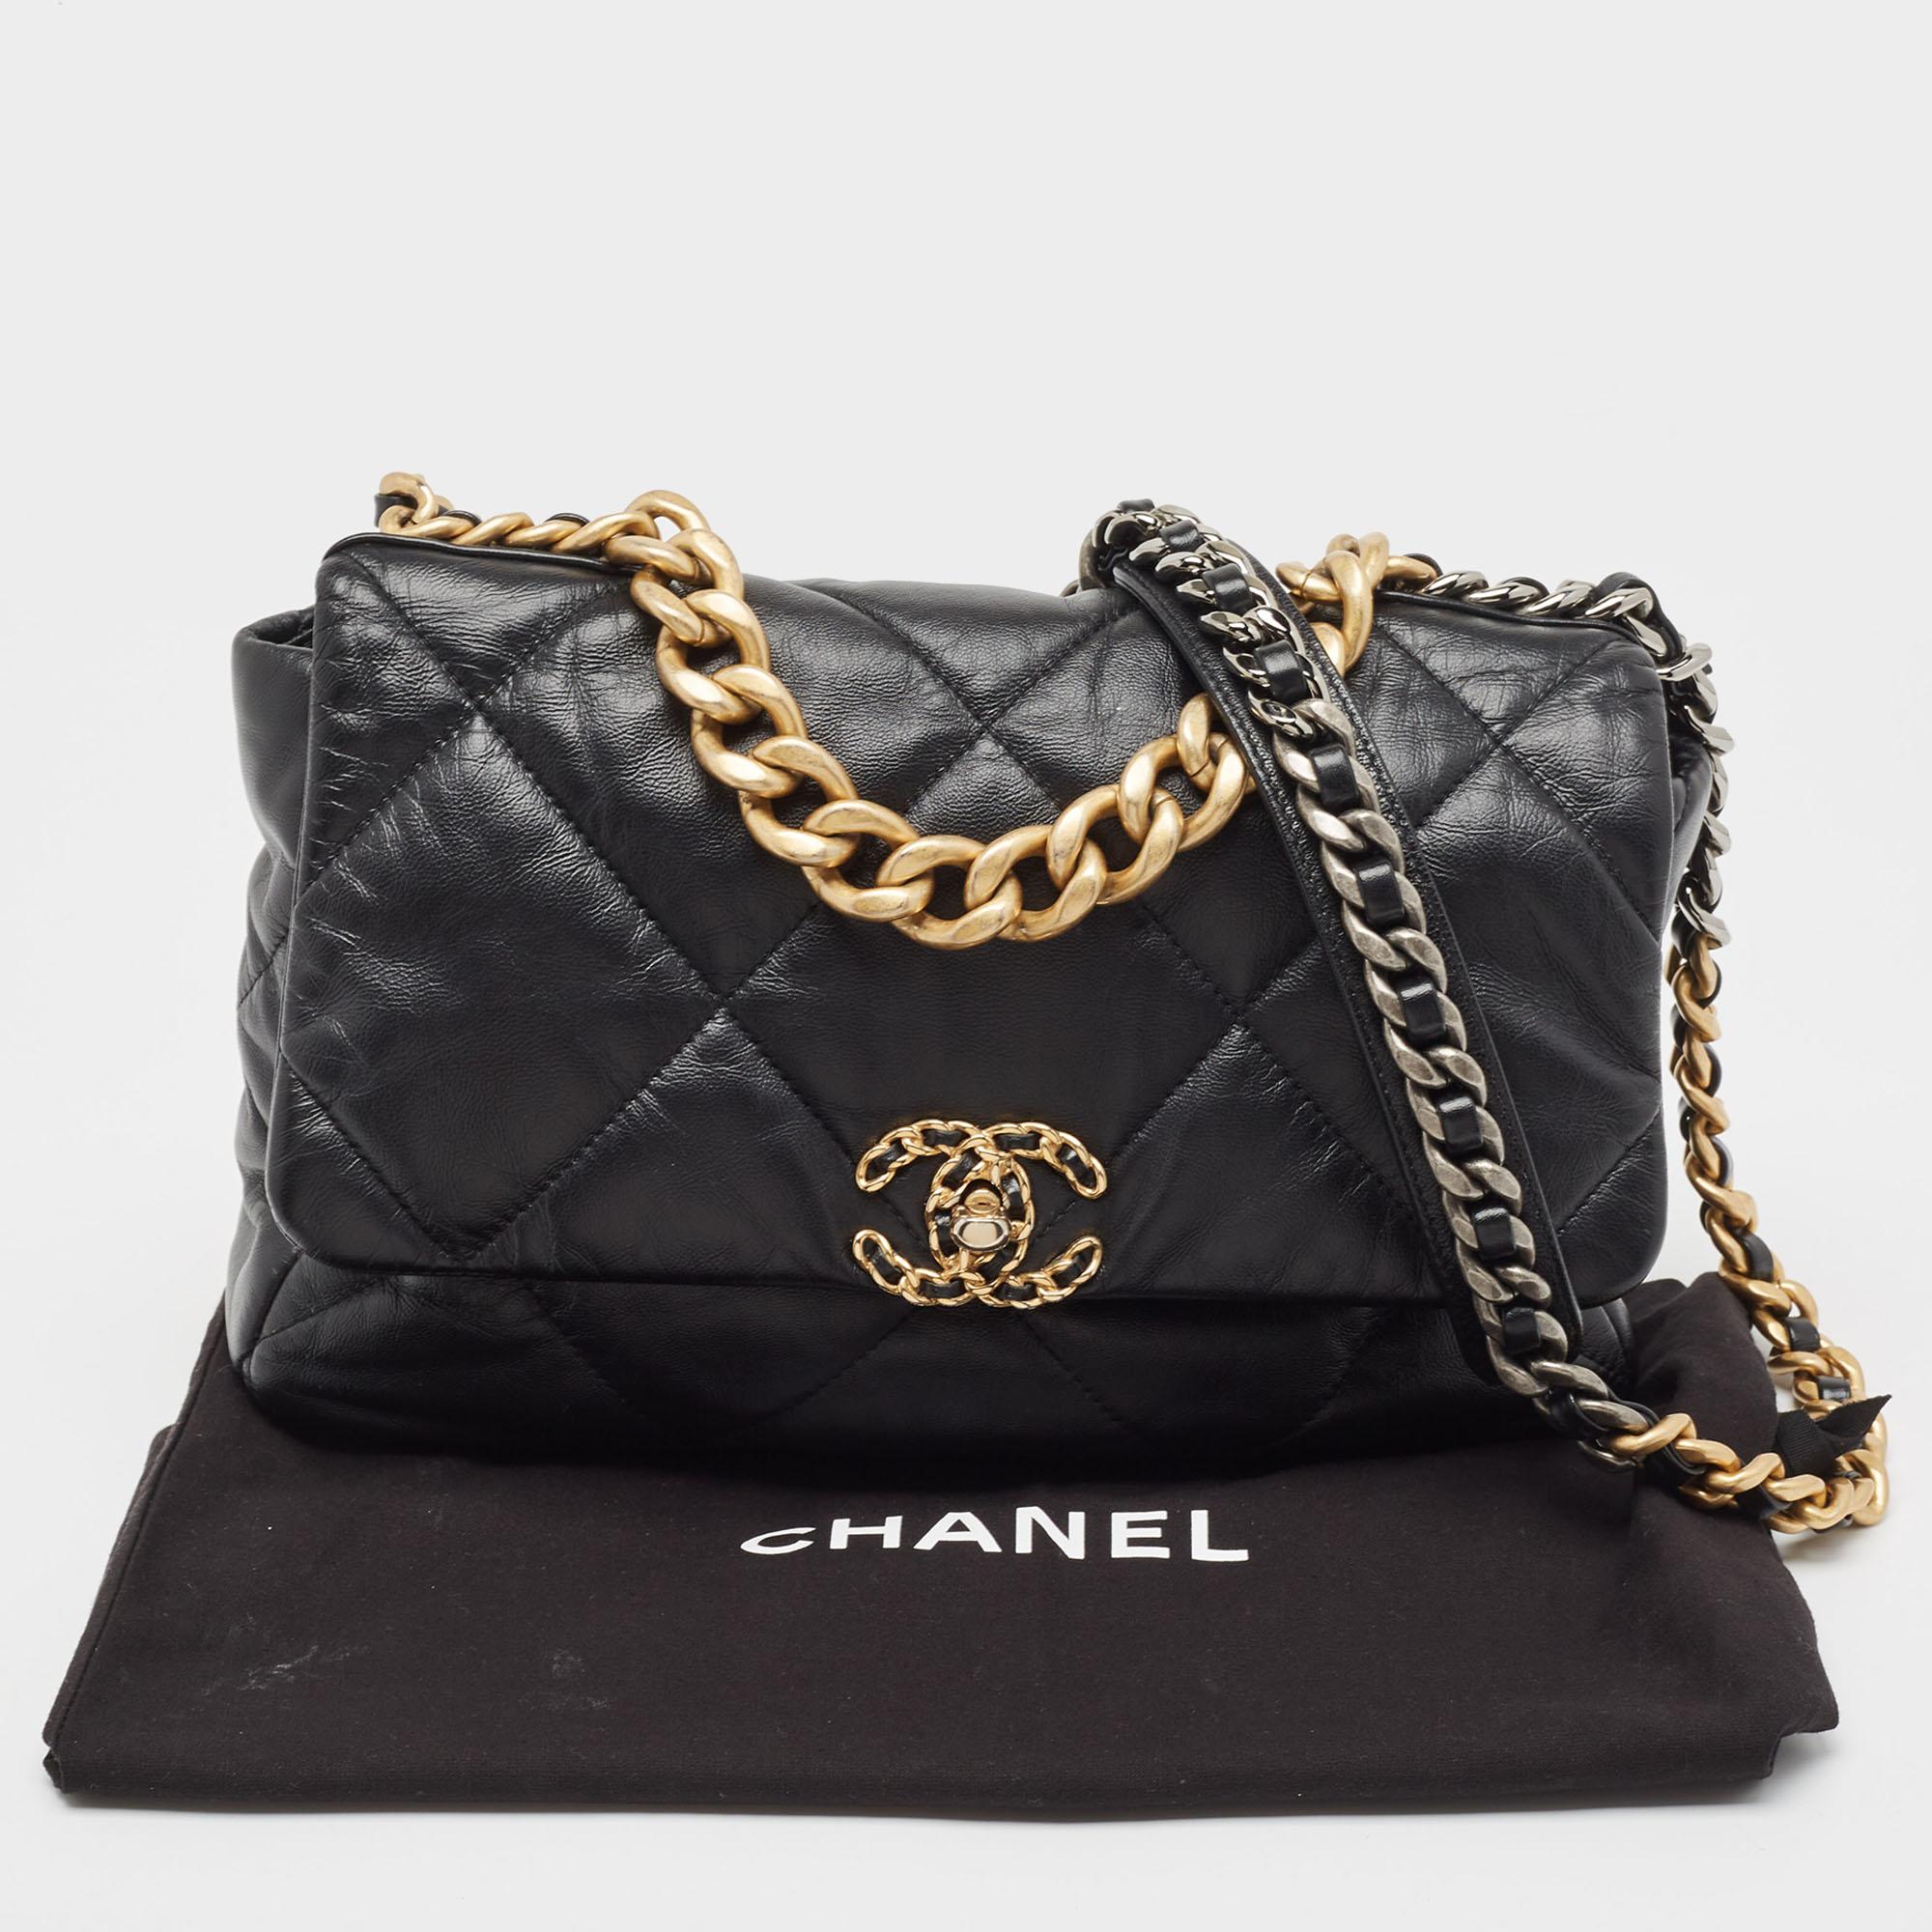 Chanel Black Quilted Leather Large 19 Flap Bag For Sale 1